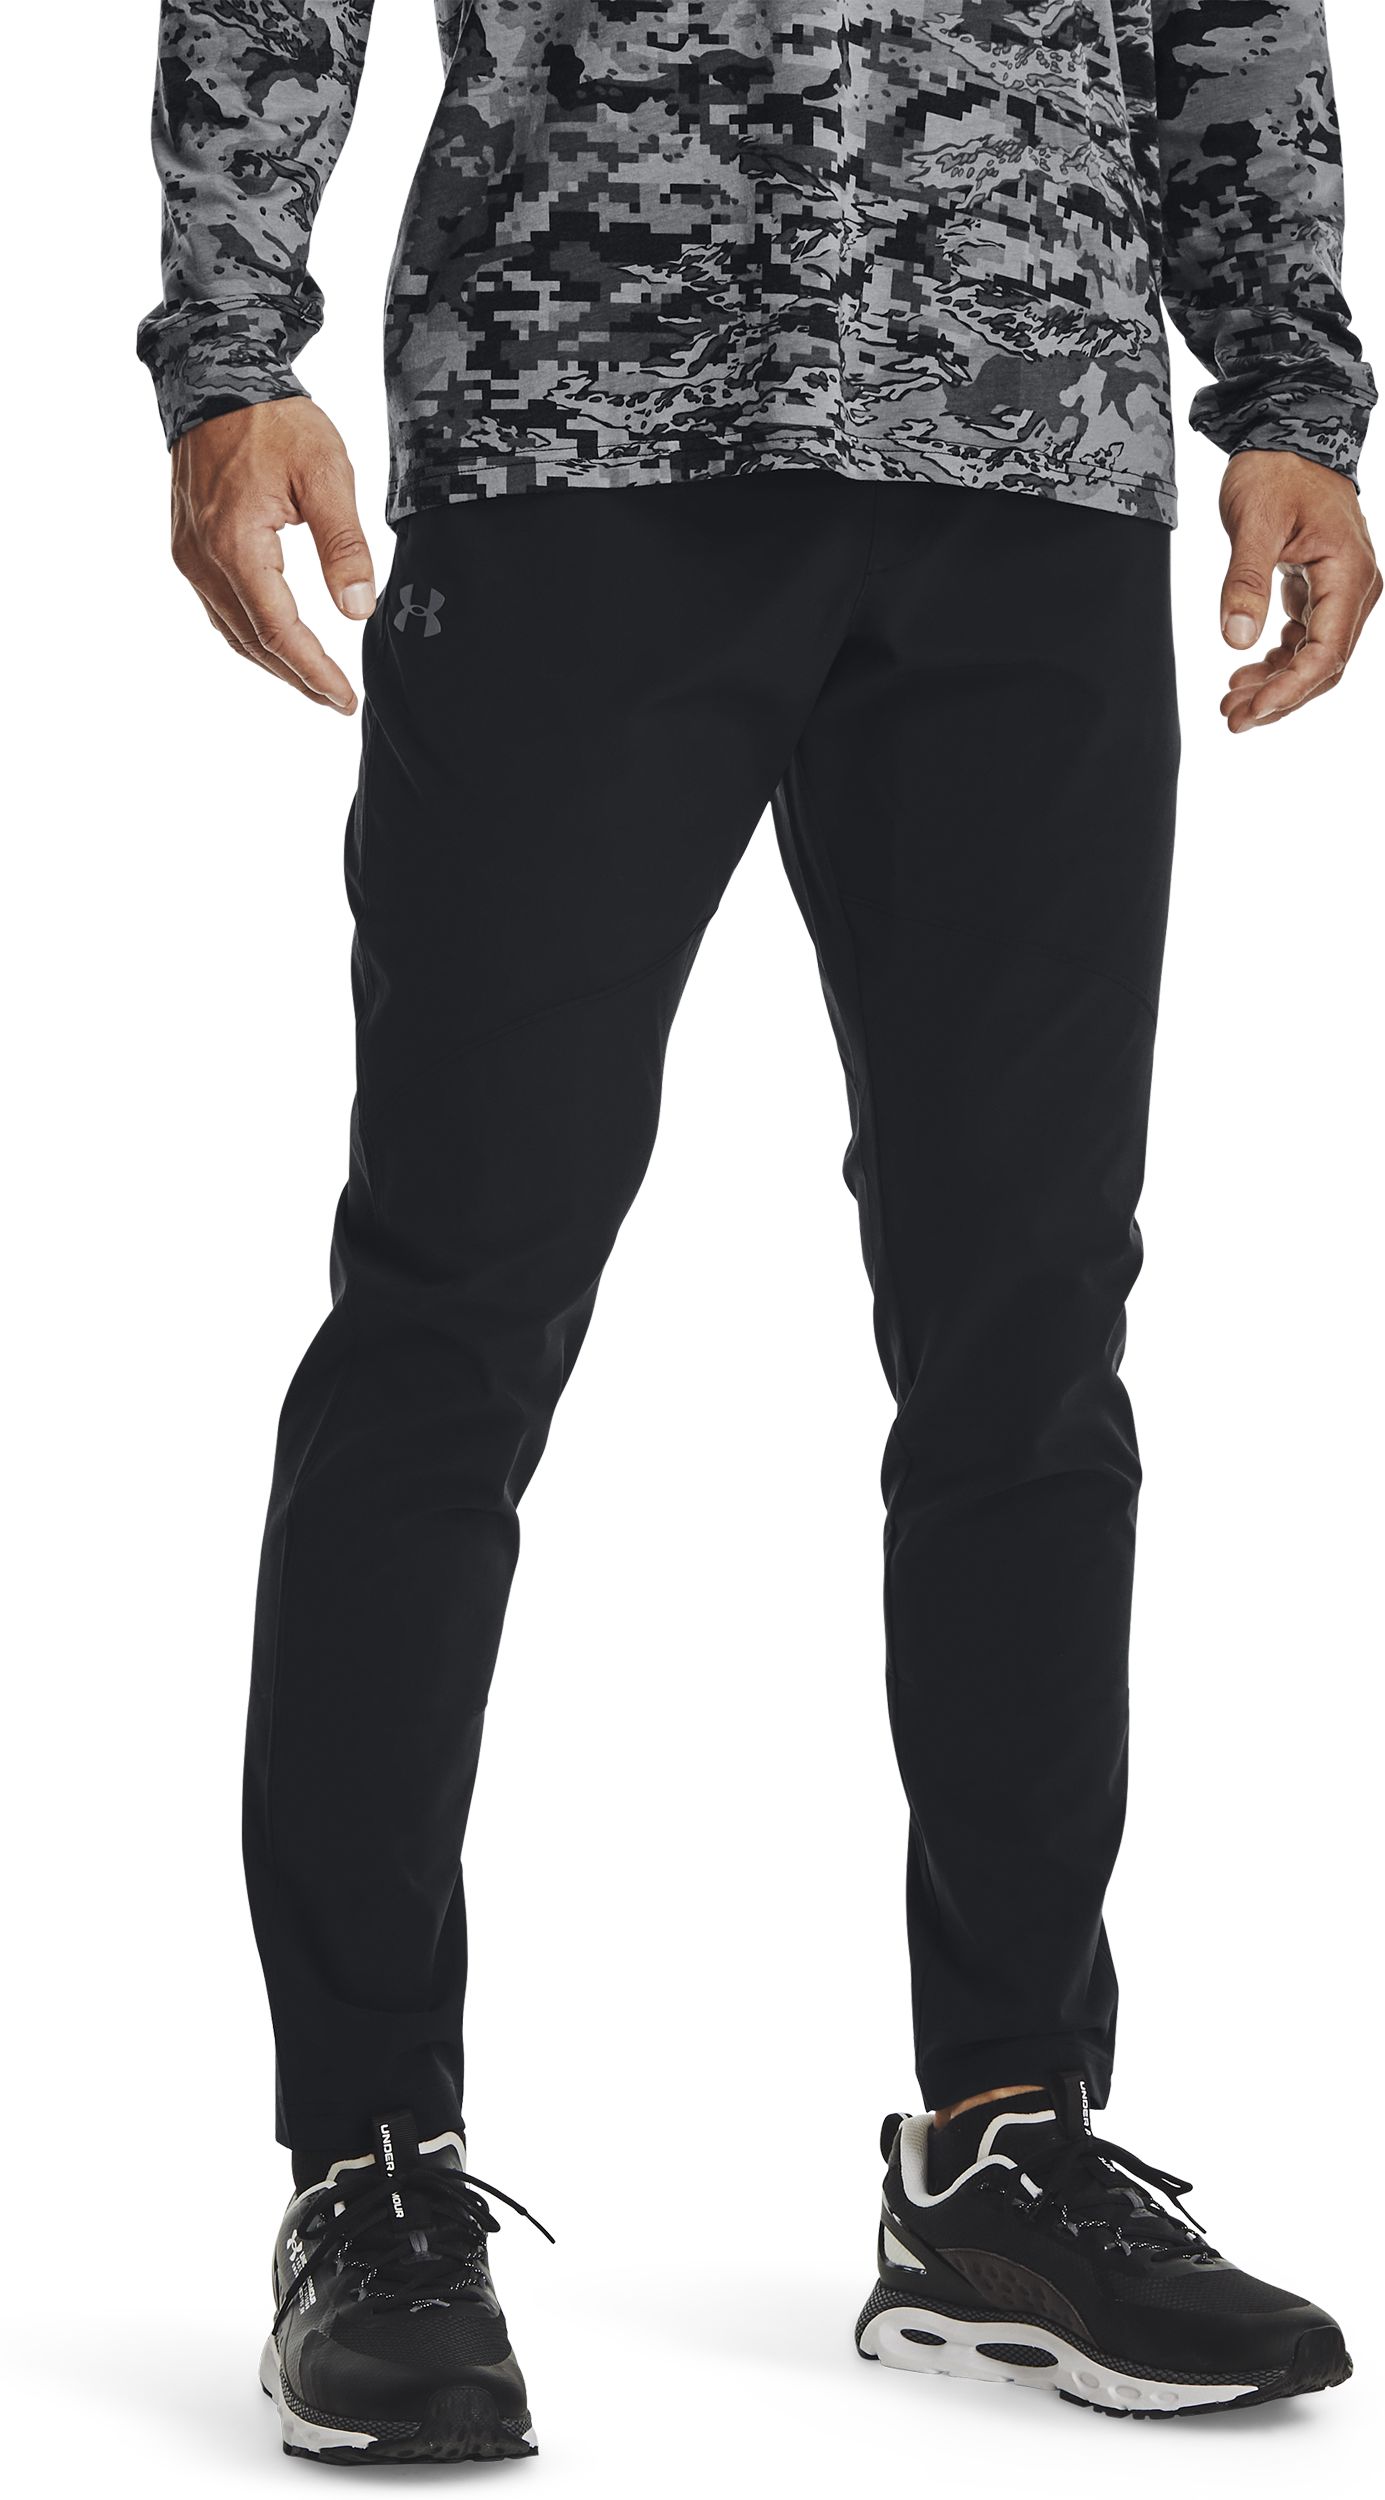 UNDER ARMOUR, M UA STRETCH WOVEN PANT